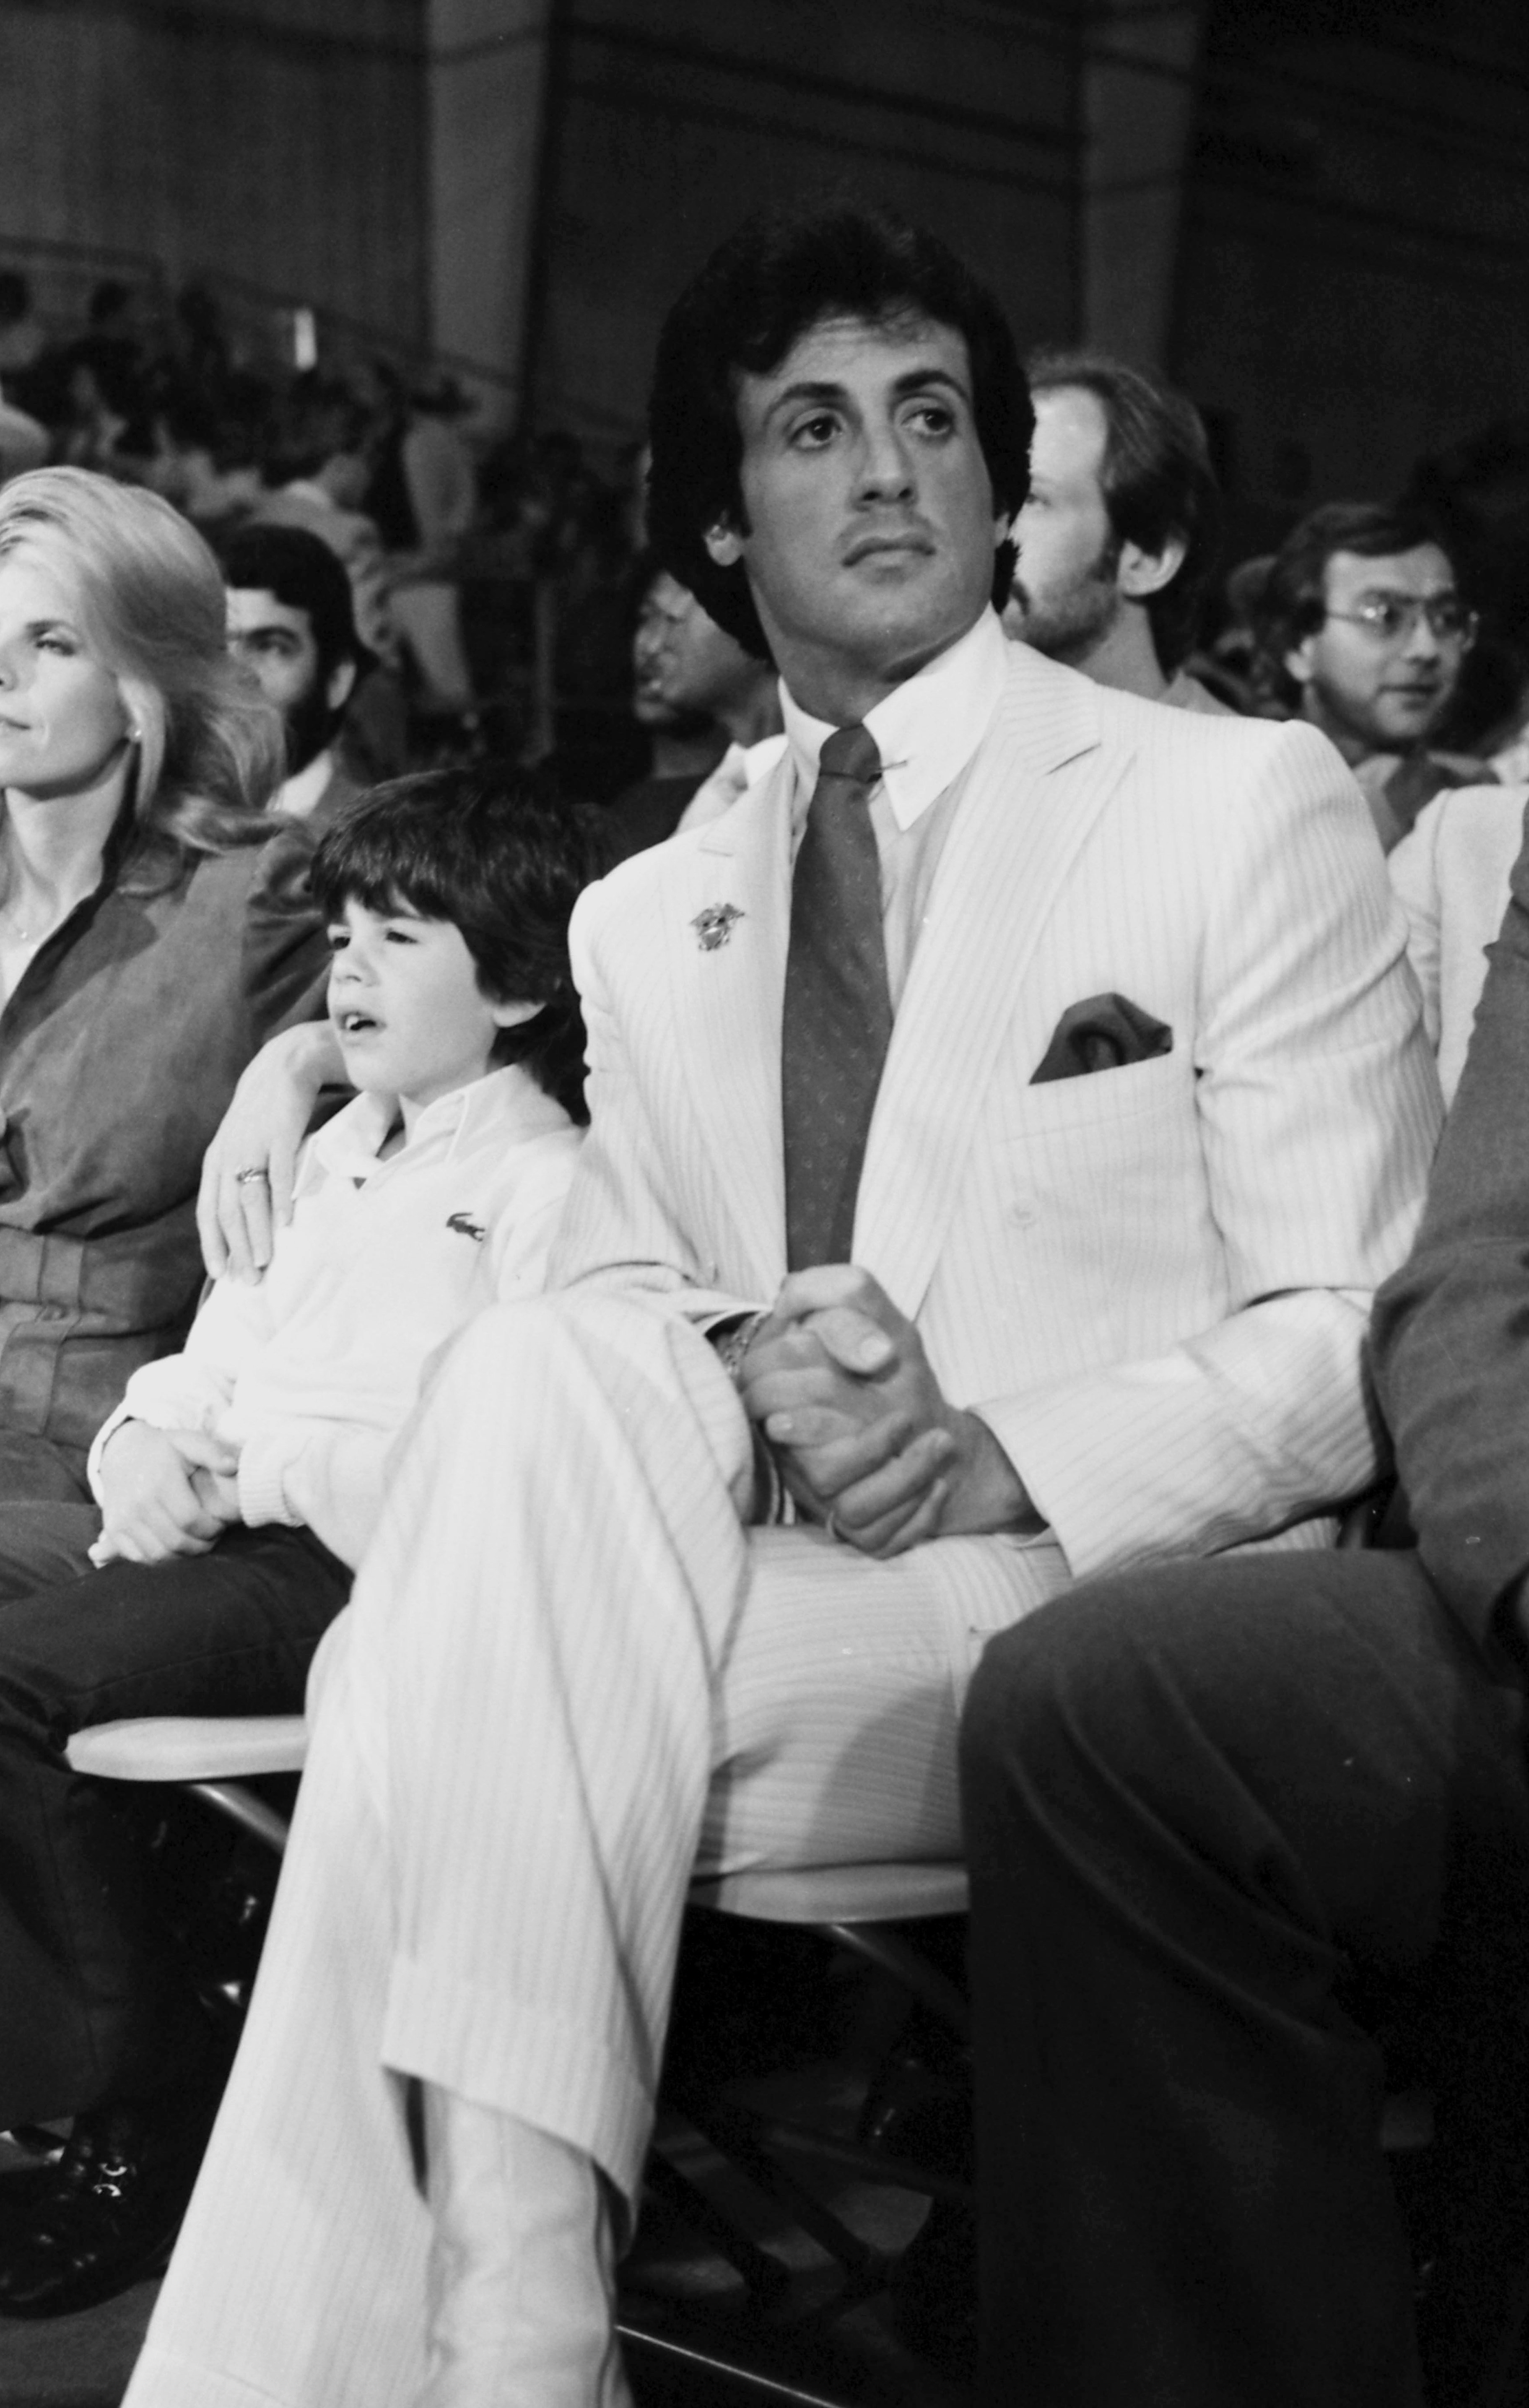 Sasha Czack, Sage Stallone, and Sylvester Stallone at a boxing match on October 30, 1982, in Las Vegas, Nevada. | Source: The Ring Magazine/Getty Images